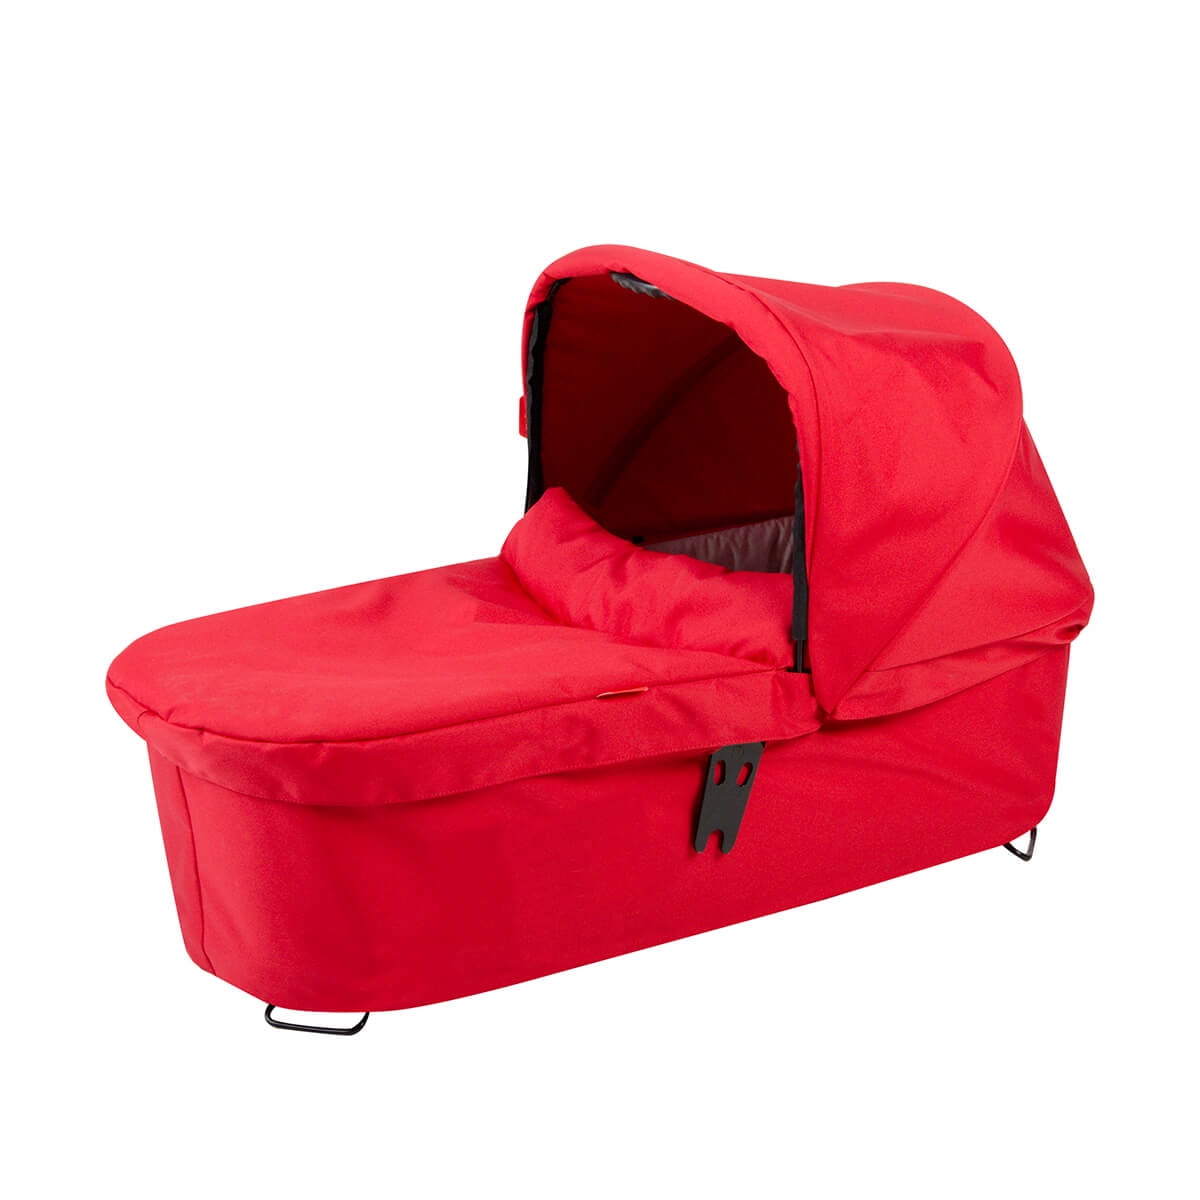 dash carrycot 9 in 1 price